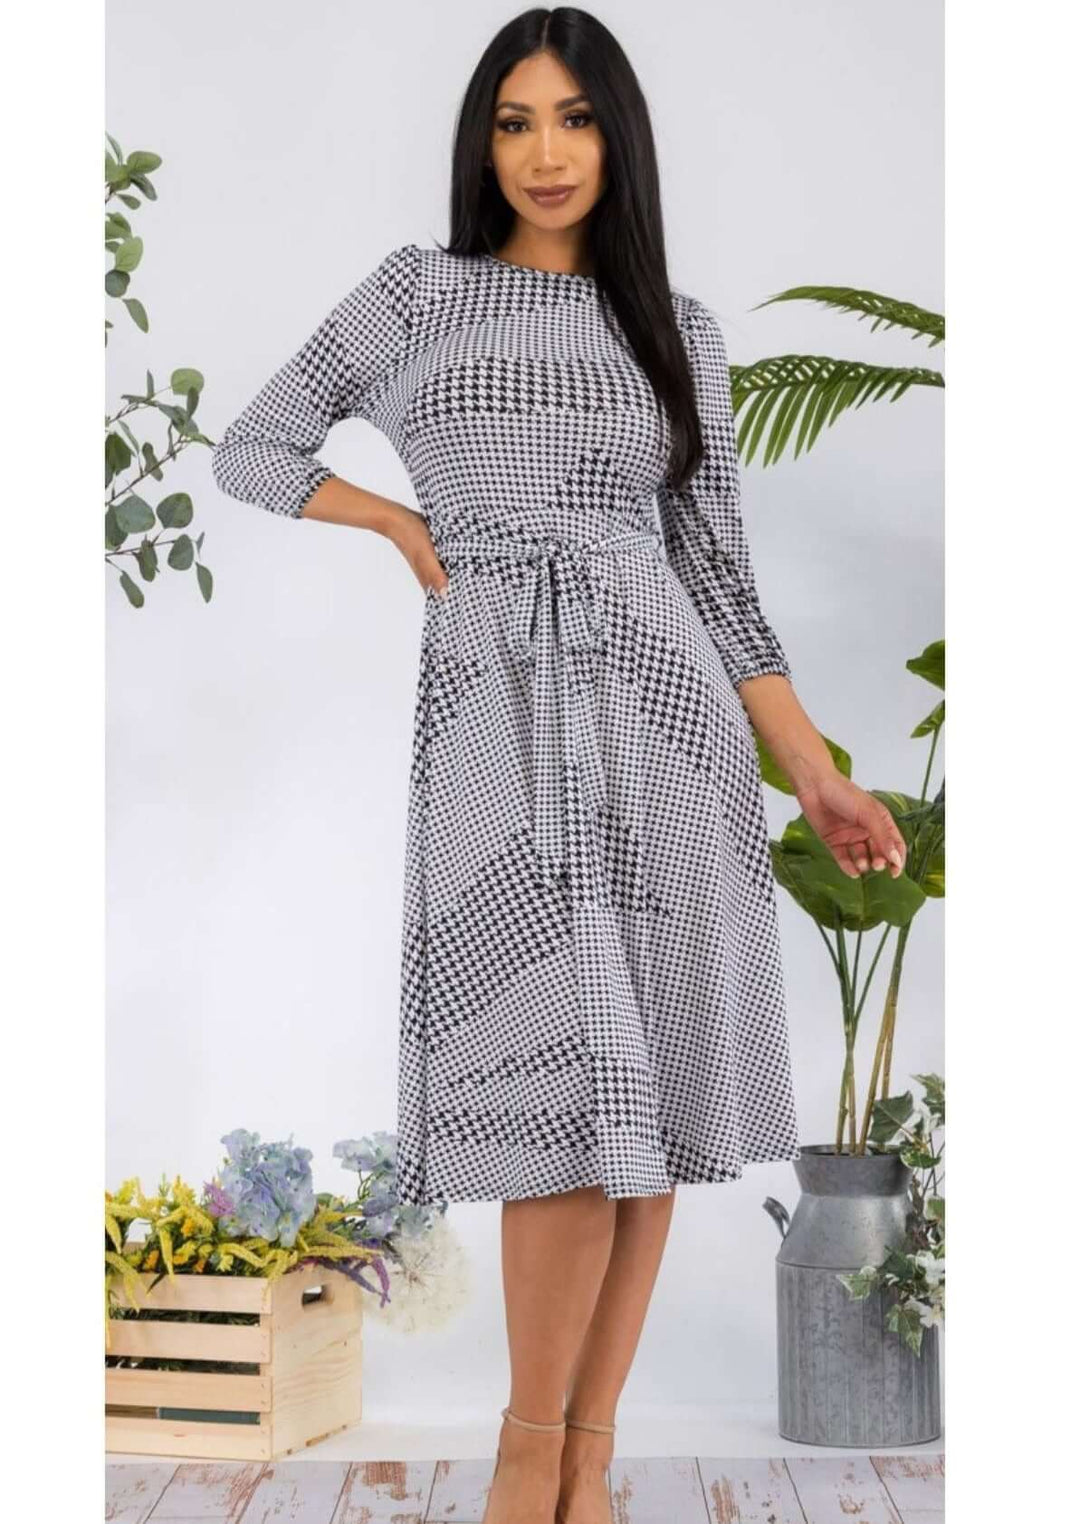 Ladies USA Made Black & White Houndstooth Print Midi Length Dress with 3/4 sleeves | Classy Cozy Cool Women's Made in America Boutique